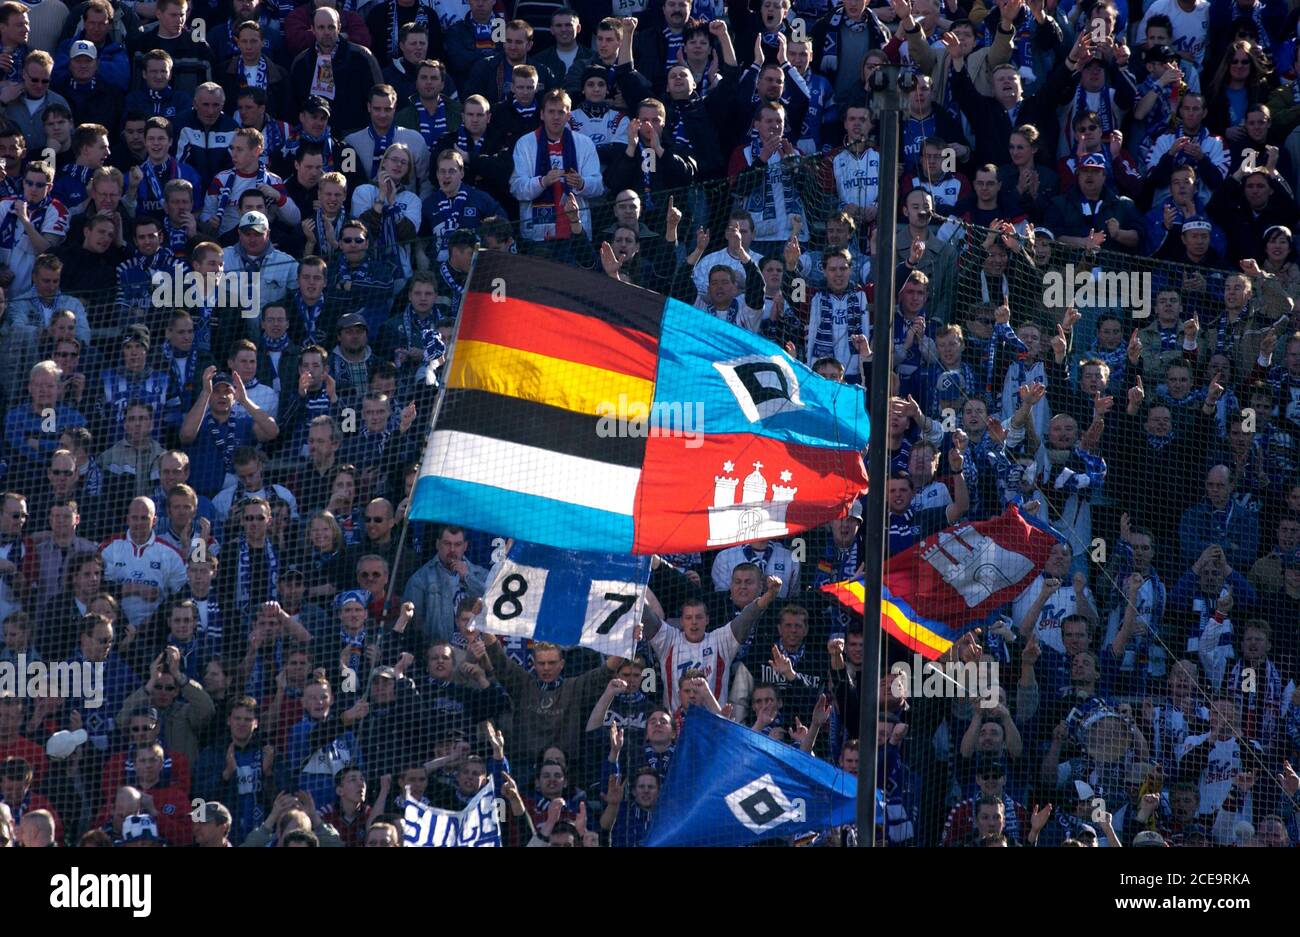 Hsv Fans High Resolution Stock Photography and Images - Alamy